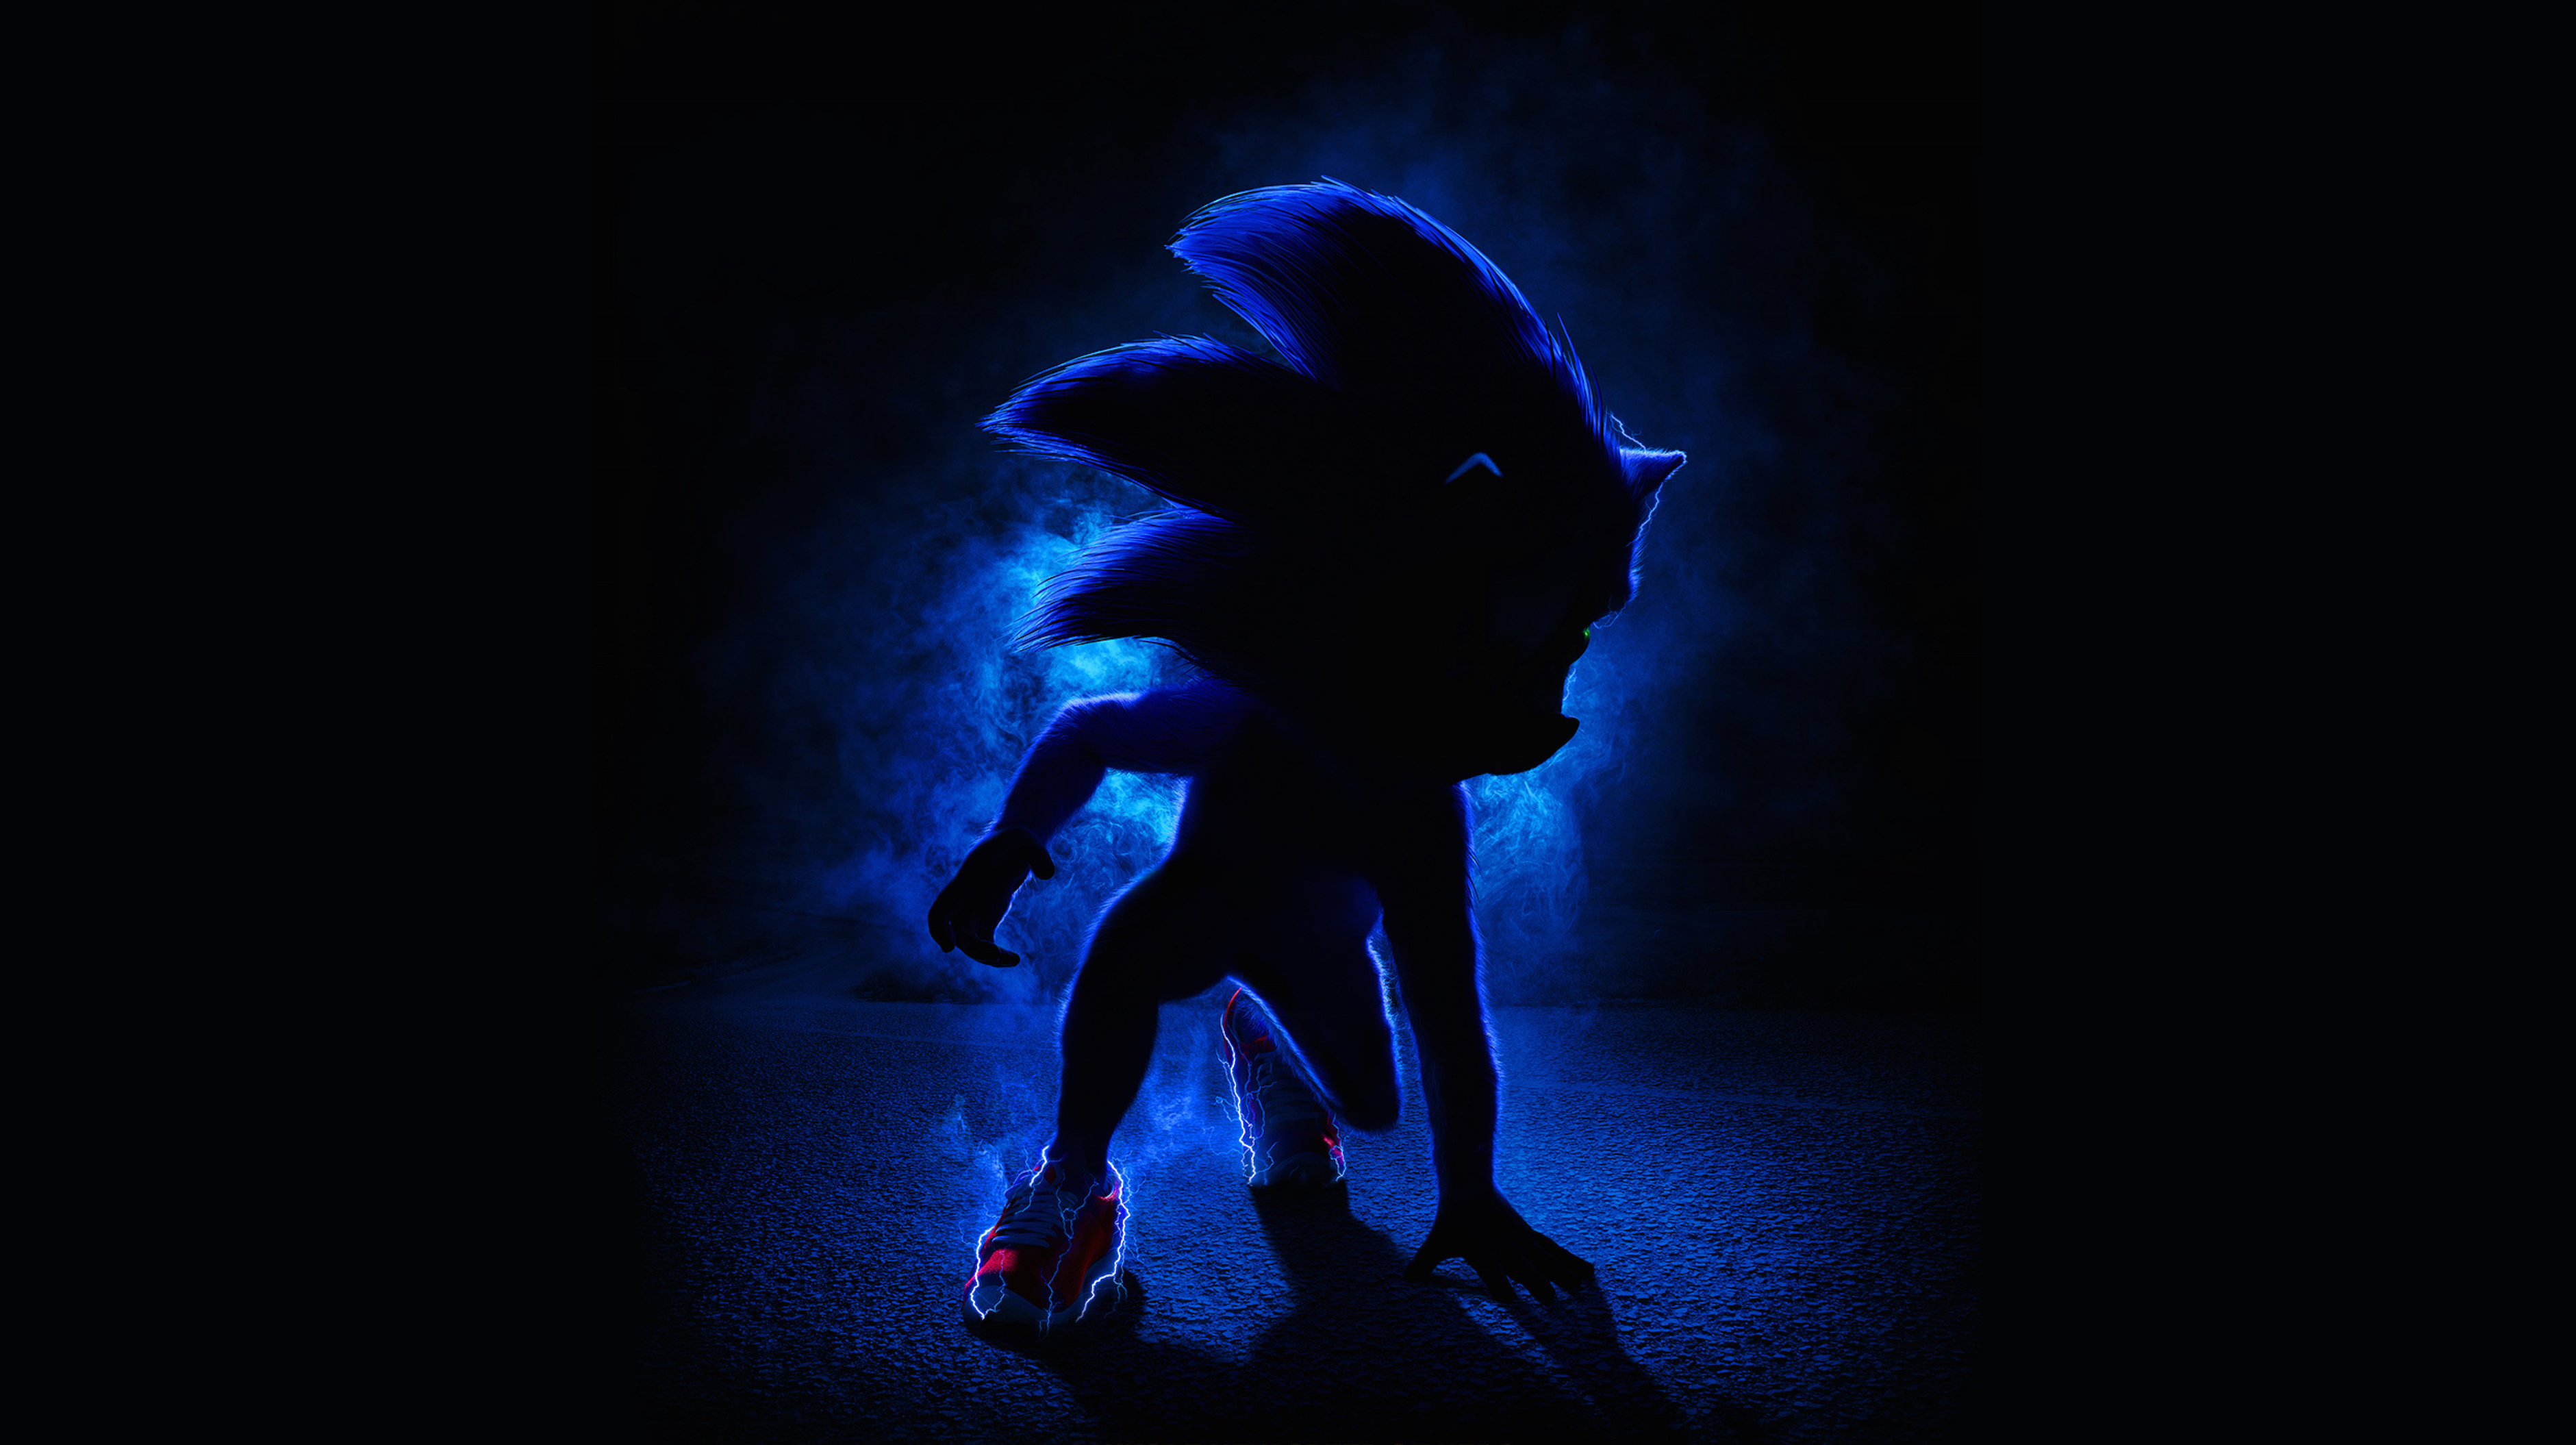 Sonic The Hedgehog 19 Movie Poster Wallpaper Hd Movies 4k Wallpapers Images Photos And Background